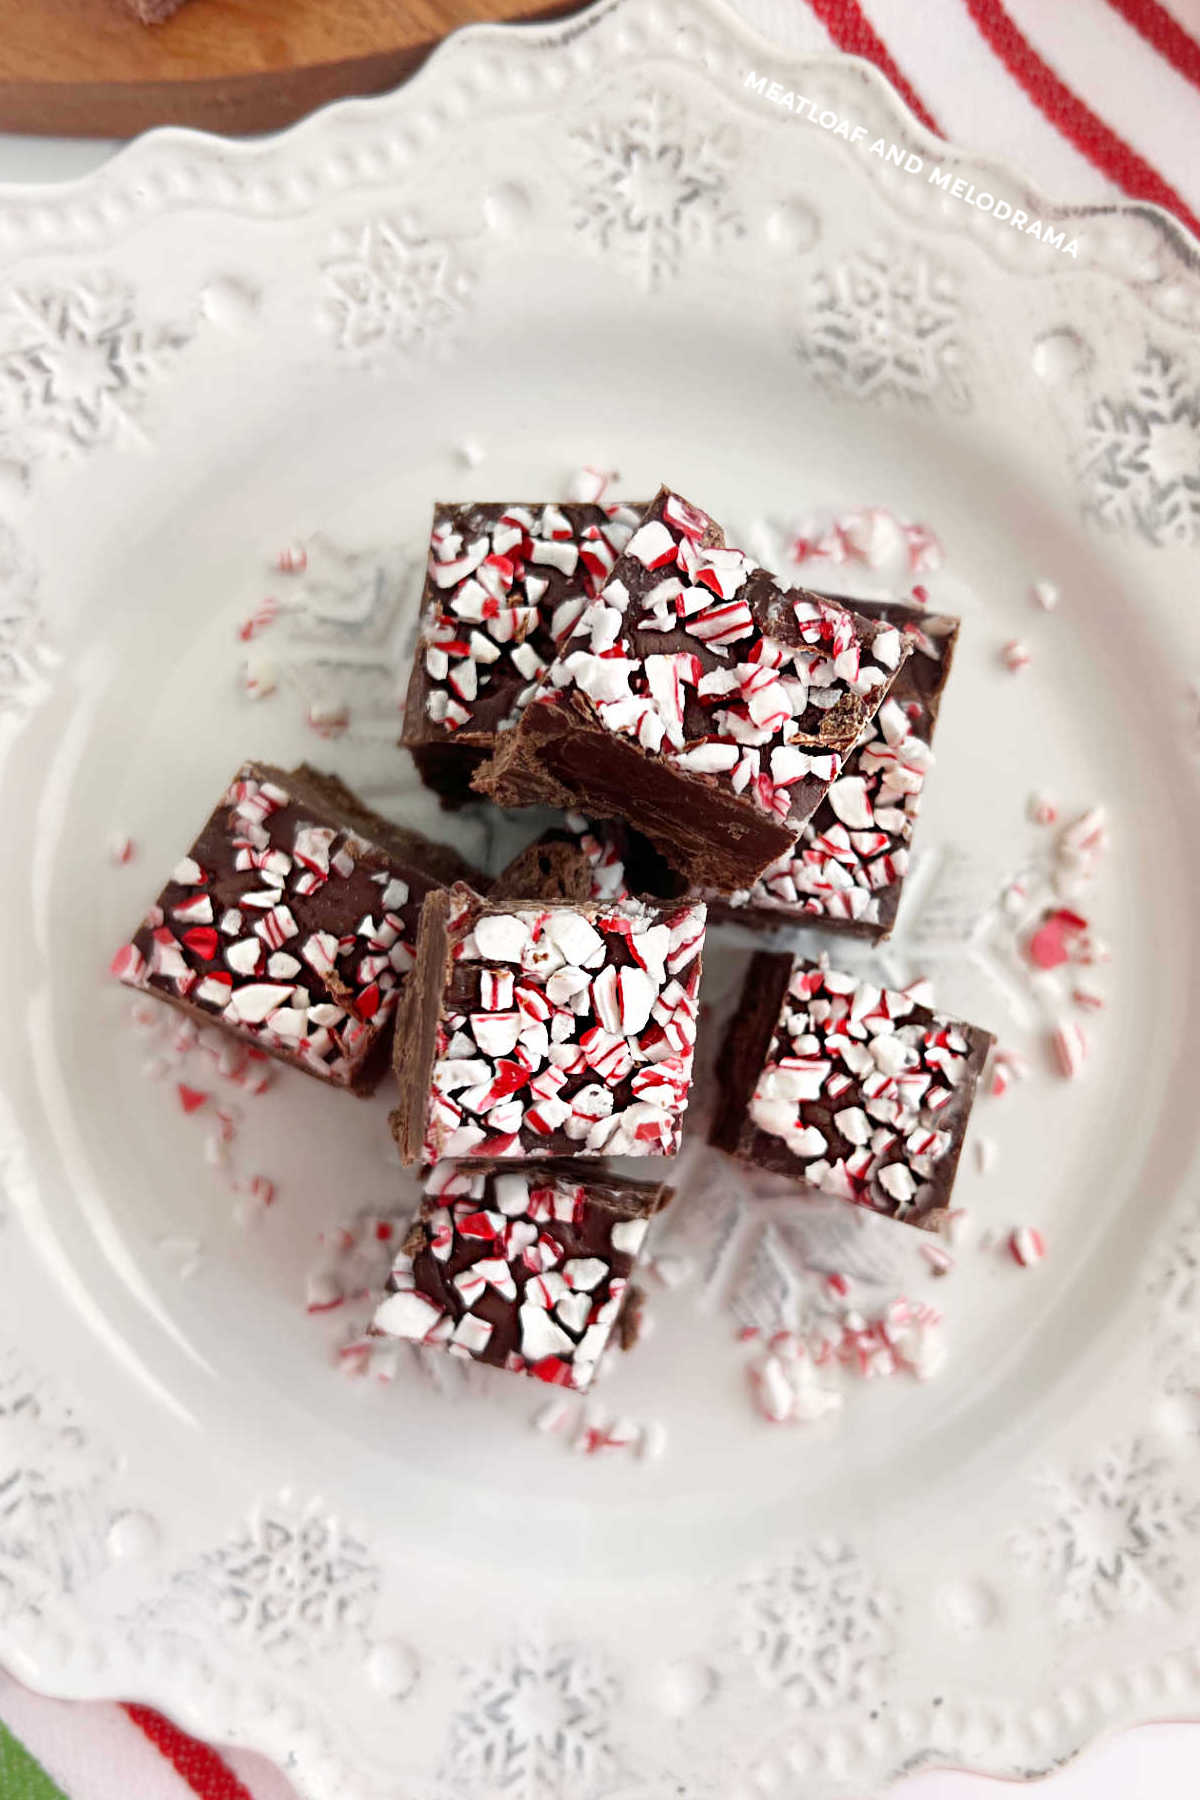 dark chocolate peppermint fudge with crushed peppermint candies on top on a plate